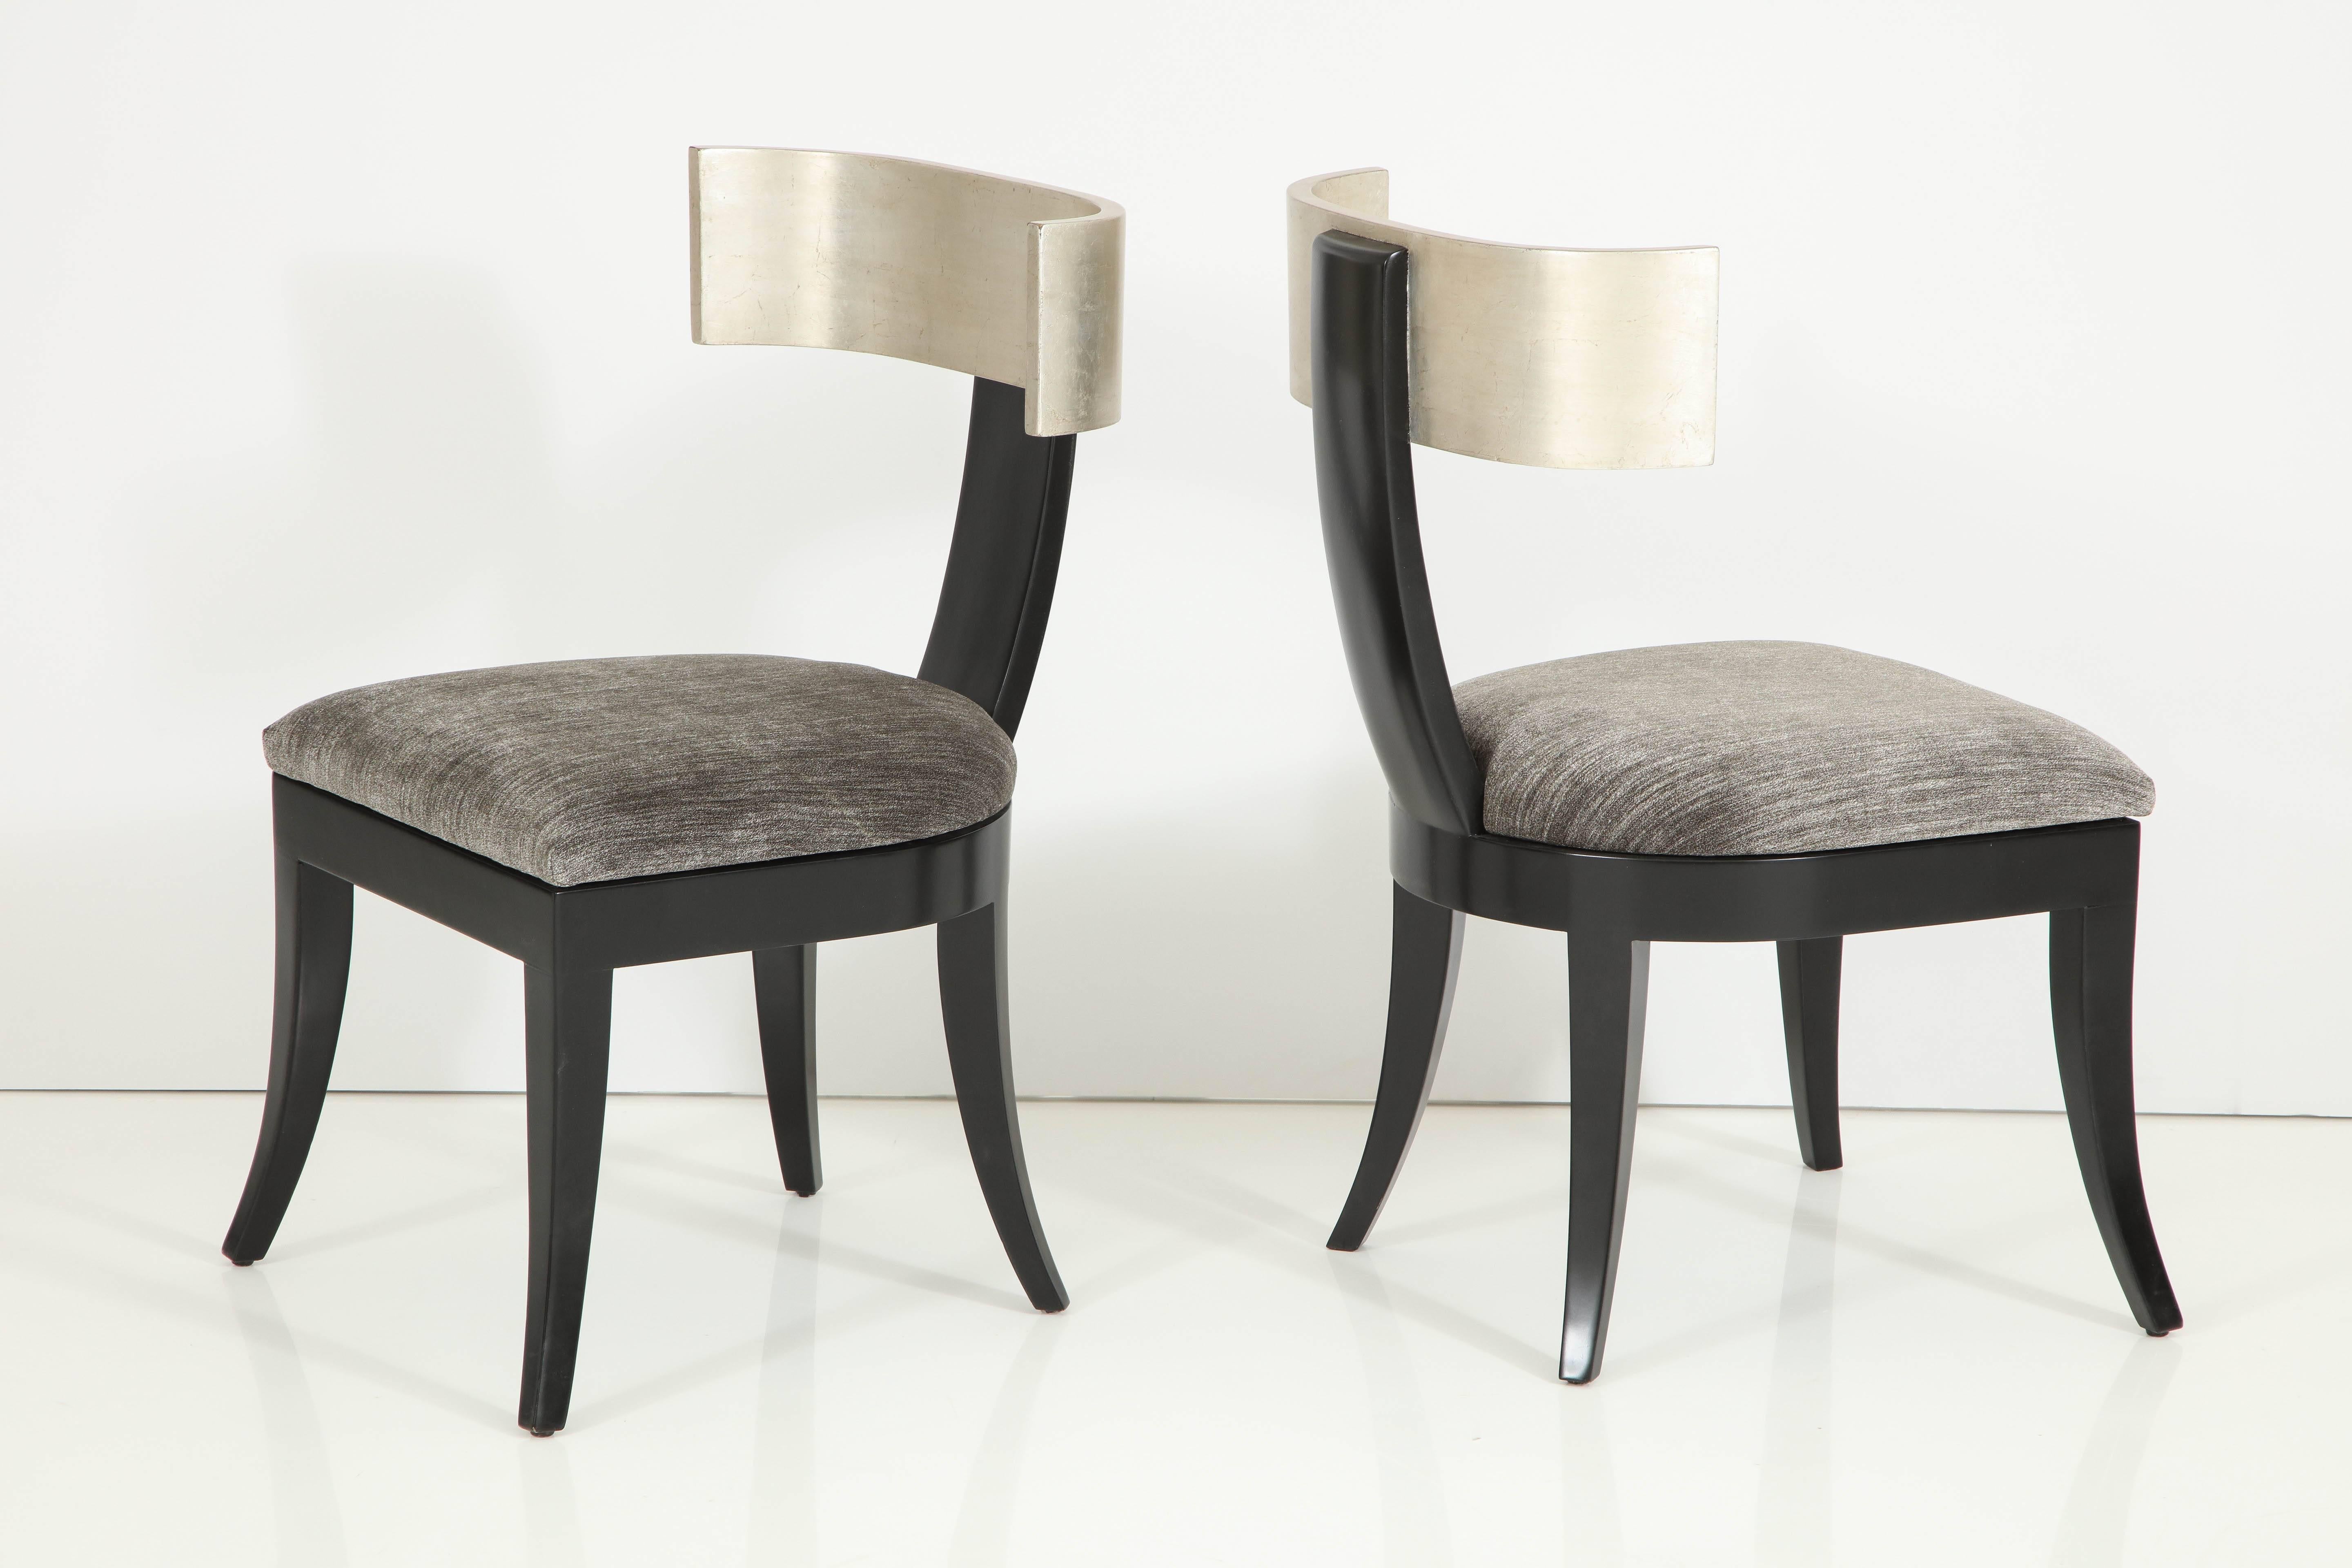 Stunning pair of Klismos chair by J Robert Scott.
These elegant chairs were a custom order and are in a satin black finish with a glazed silver leaf back.
They have been newly reupholstered in beautiful silvery gray velvet.
